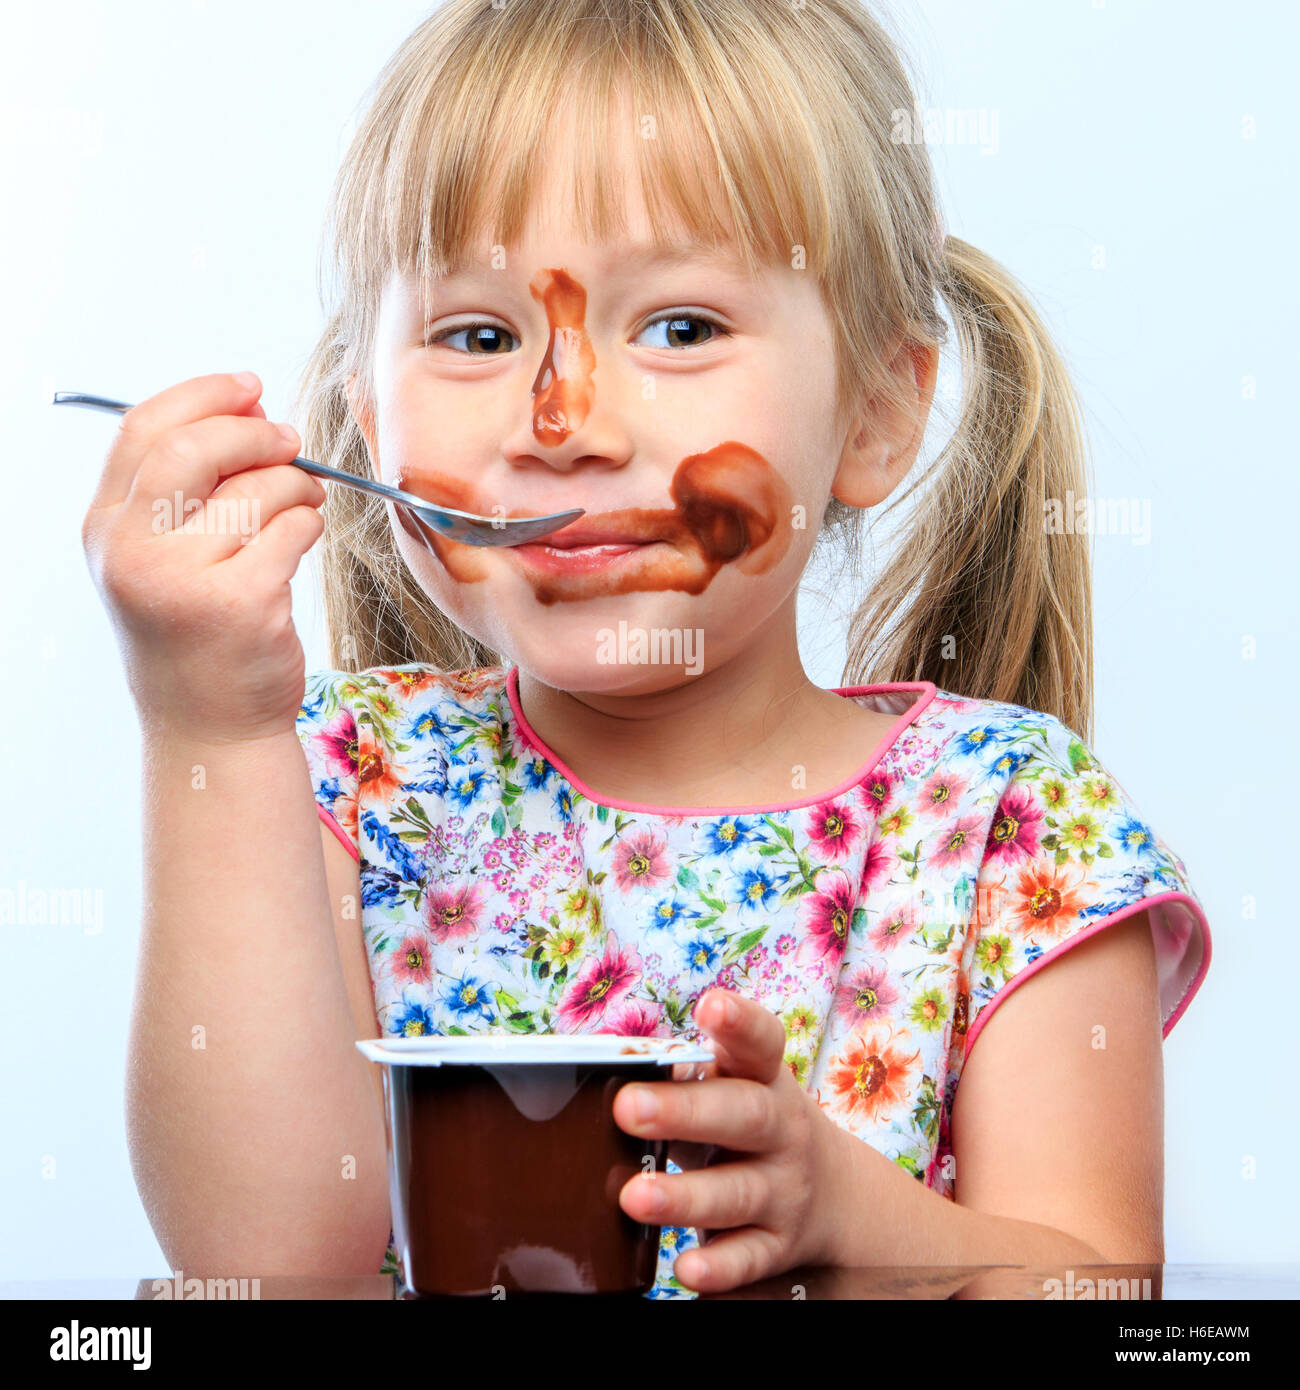 Close up portrait of Cute little girl eating chocolate yogurt at breakfast. Face messy with chocolate and funny face expresstion Stock Photo